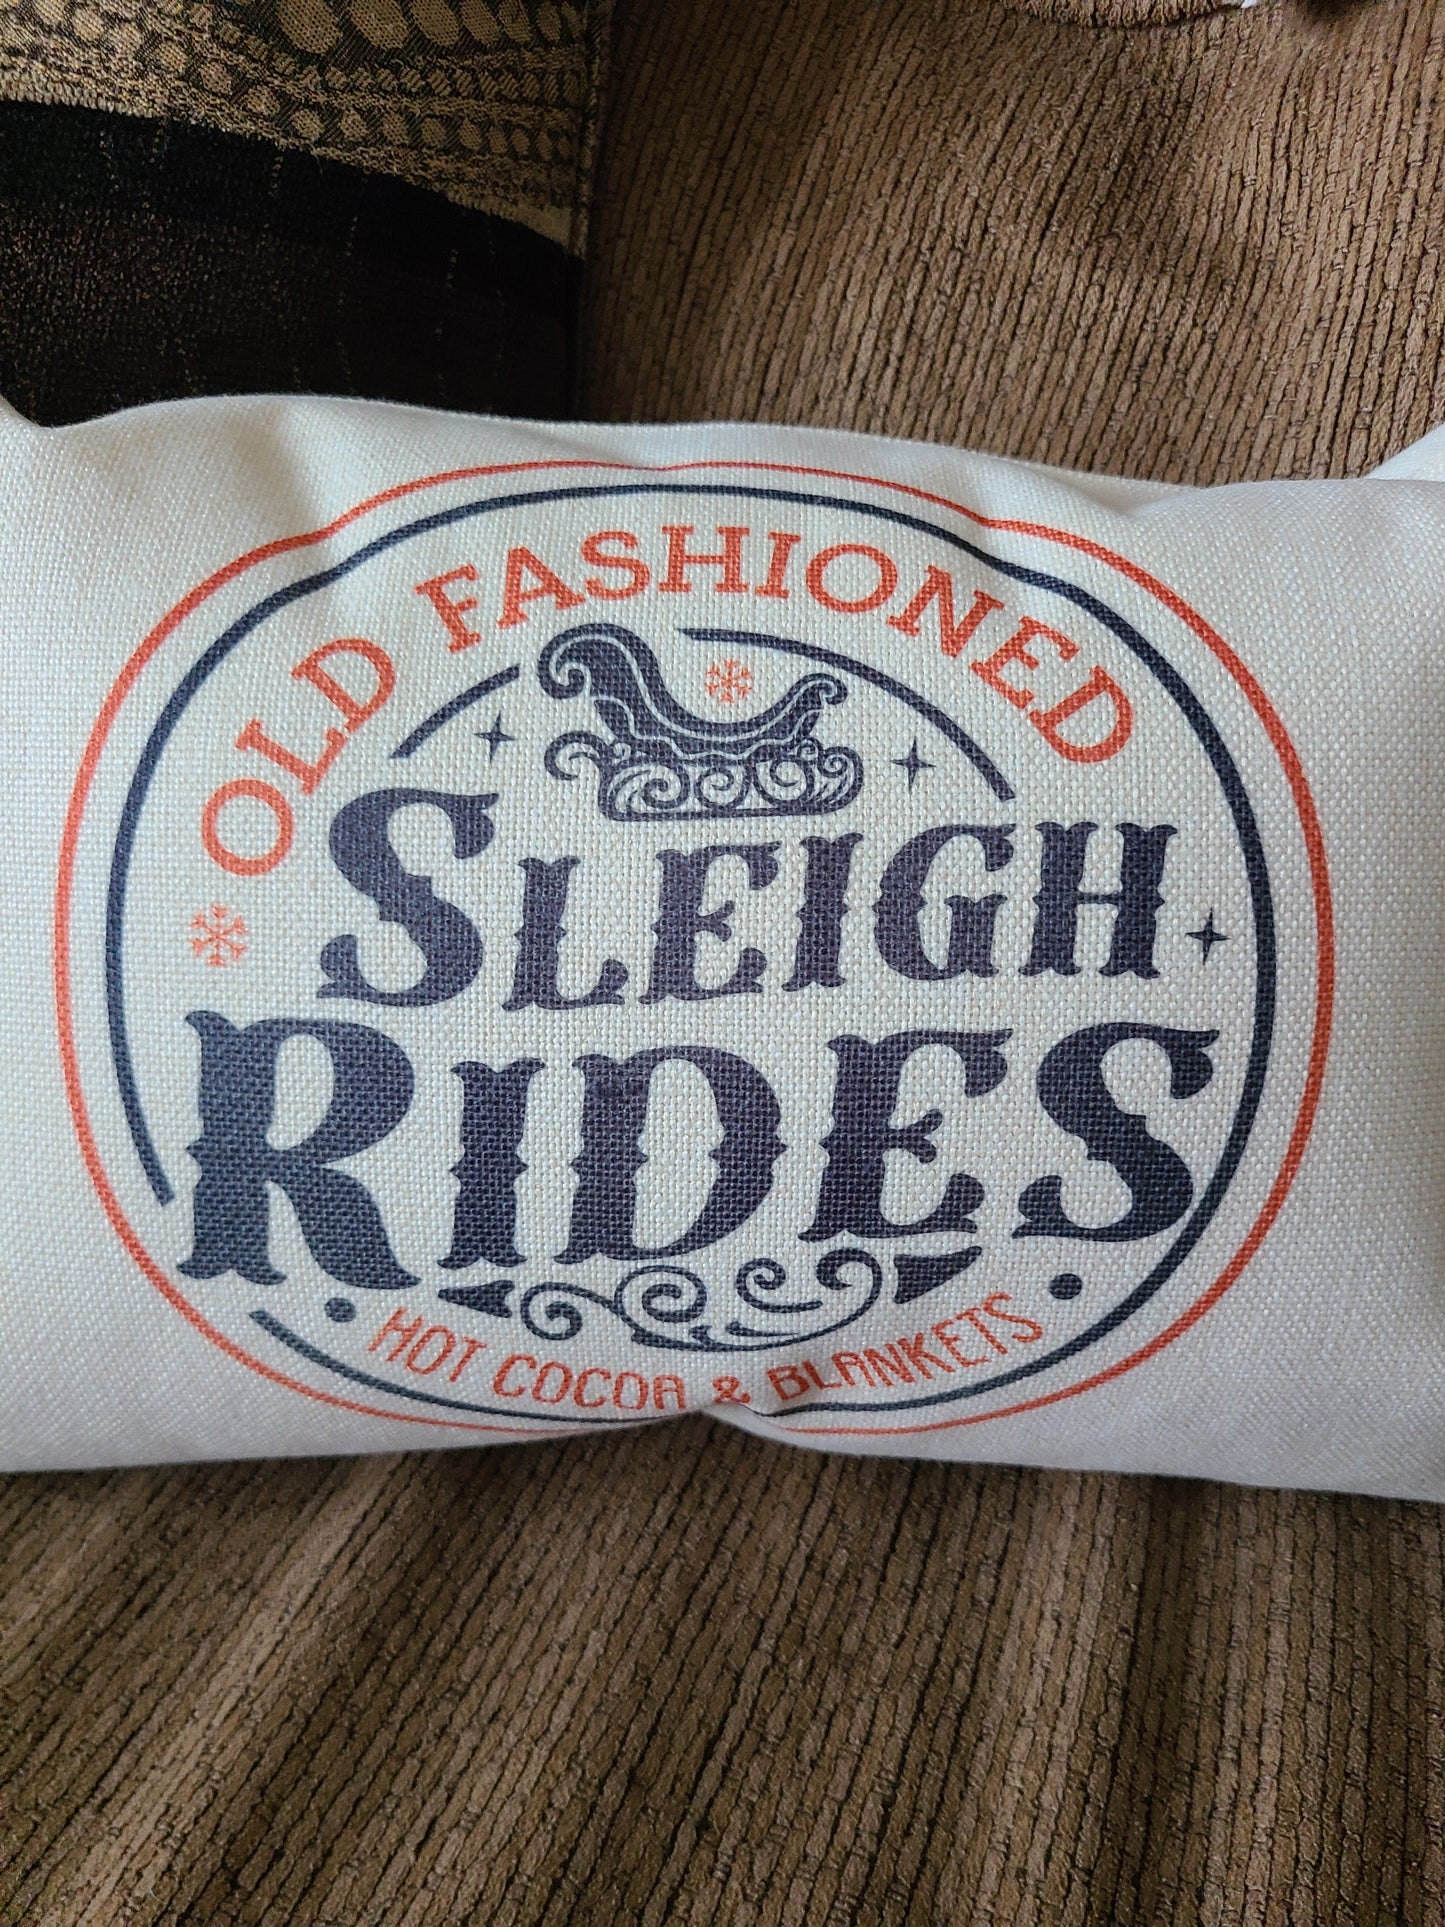 Old Fashioned Sleigh Rides Lumbar Pillow